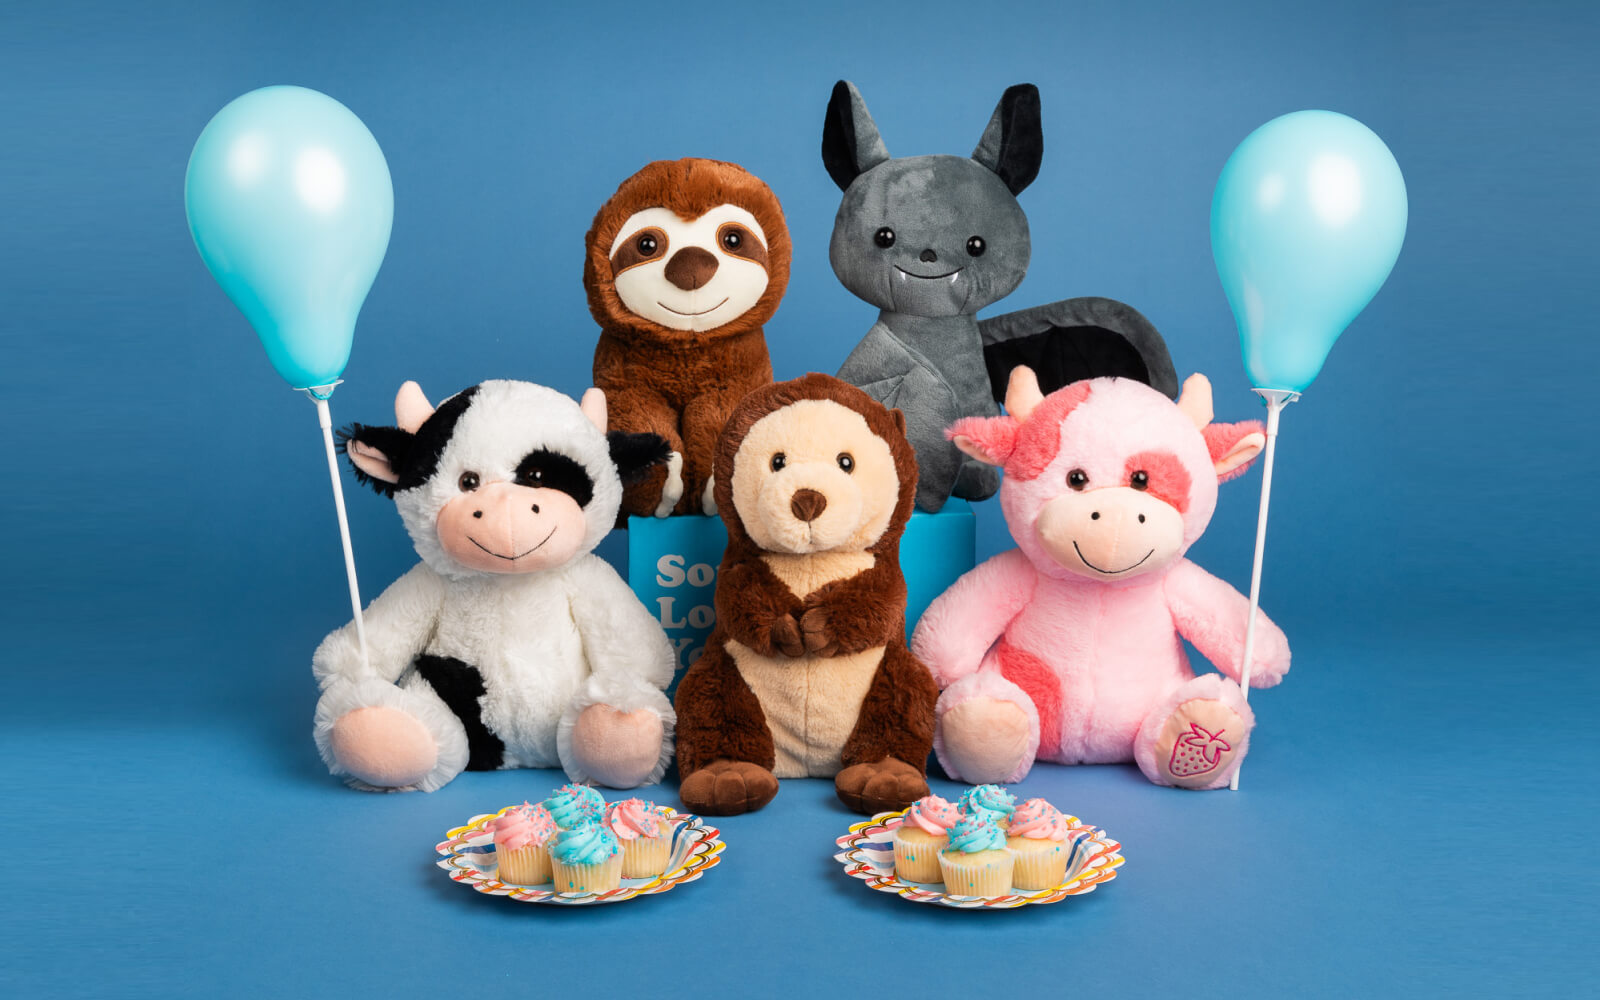 five stuffed animals holding balloons with cupcakes on plates